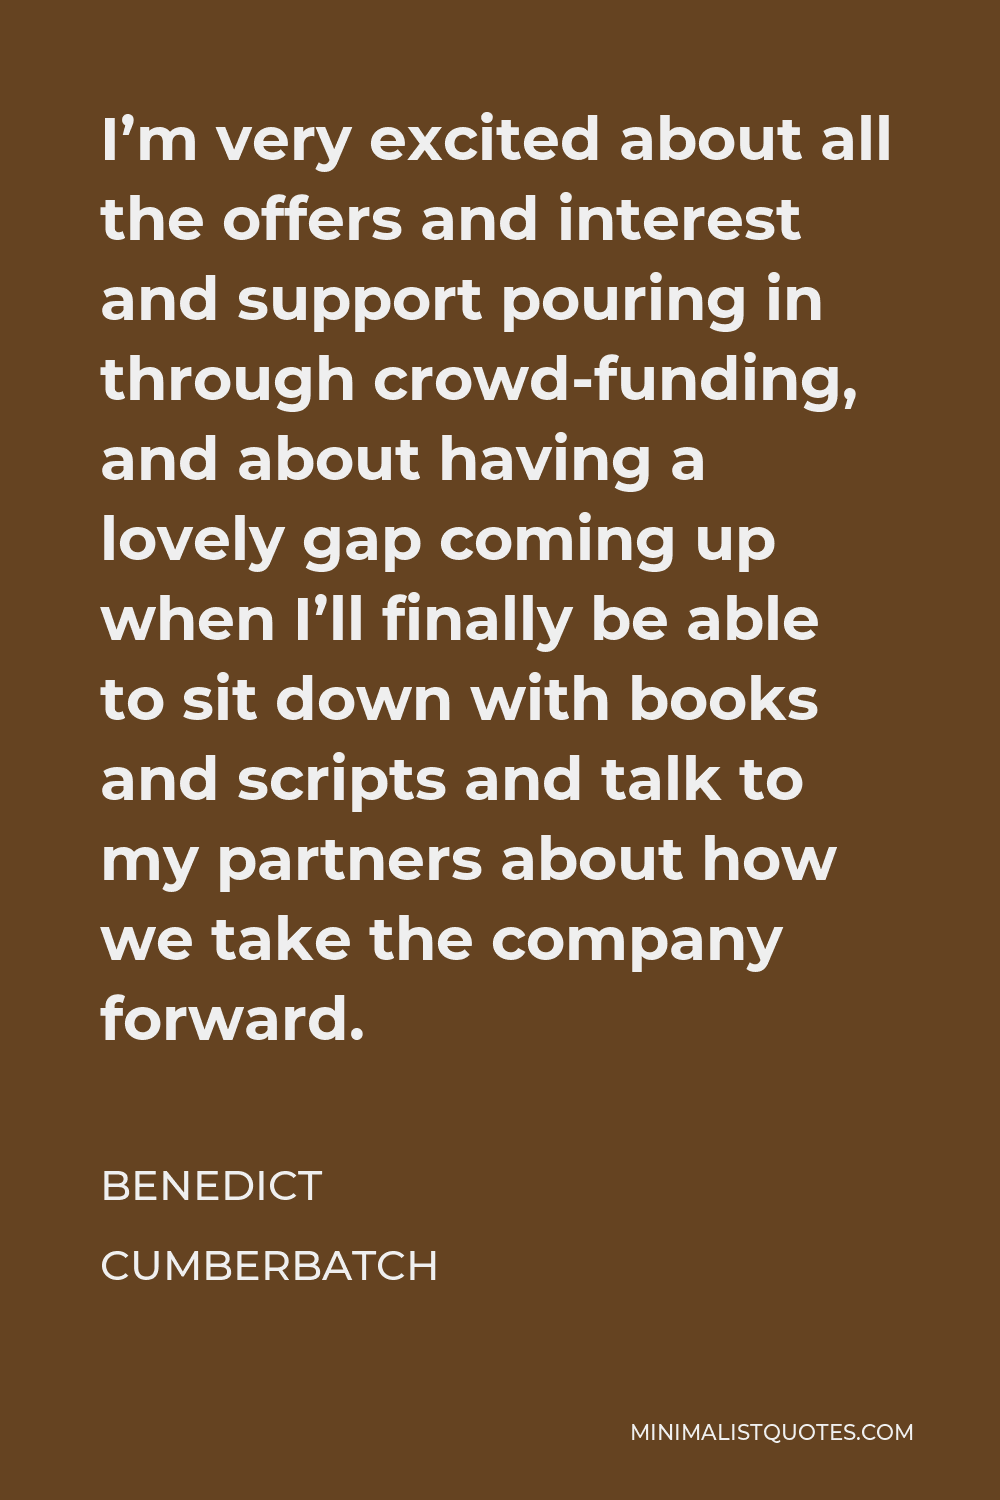 Benedict Cumberbatch Quote - I’m very excited about all the offers and interest and support pouring in through crowd-funding, and about having a lovely gap coming up when I’ll finally be able to sit down with books and scripts and talk to my partners about how we take the company forward.